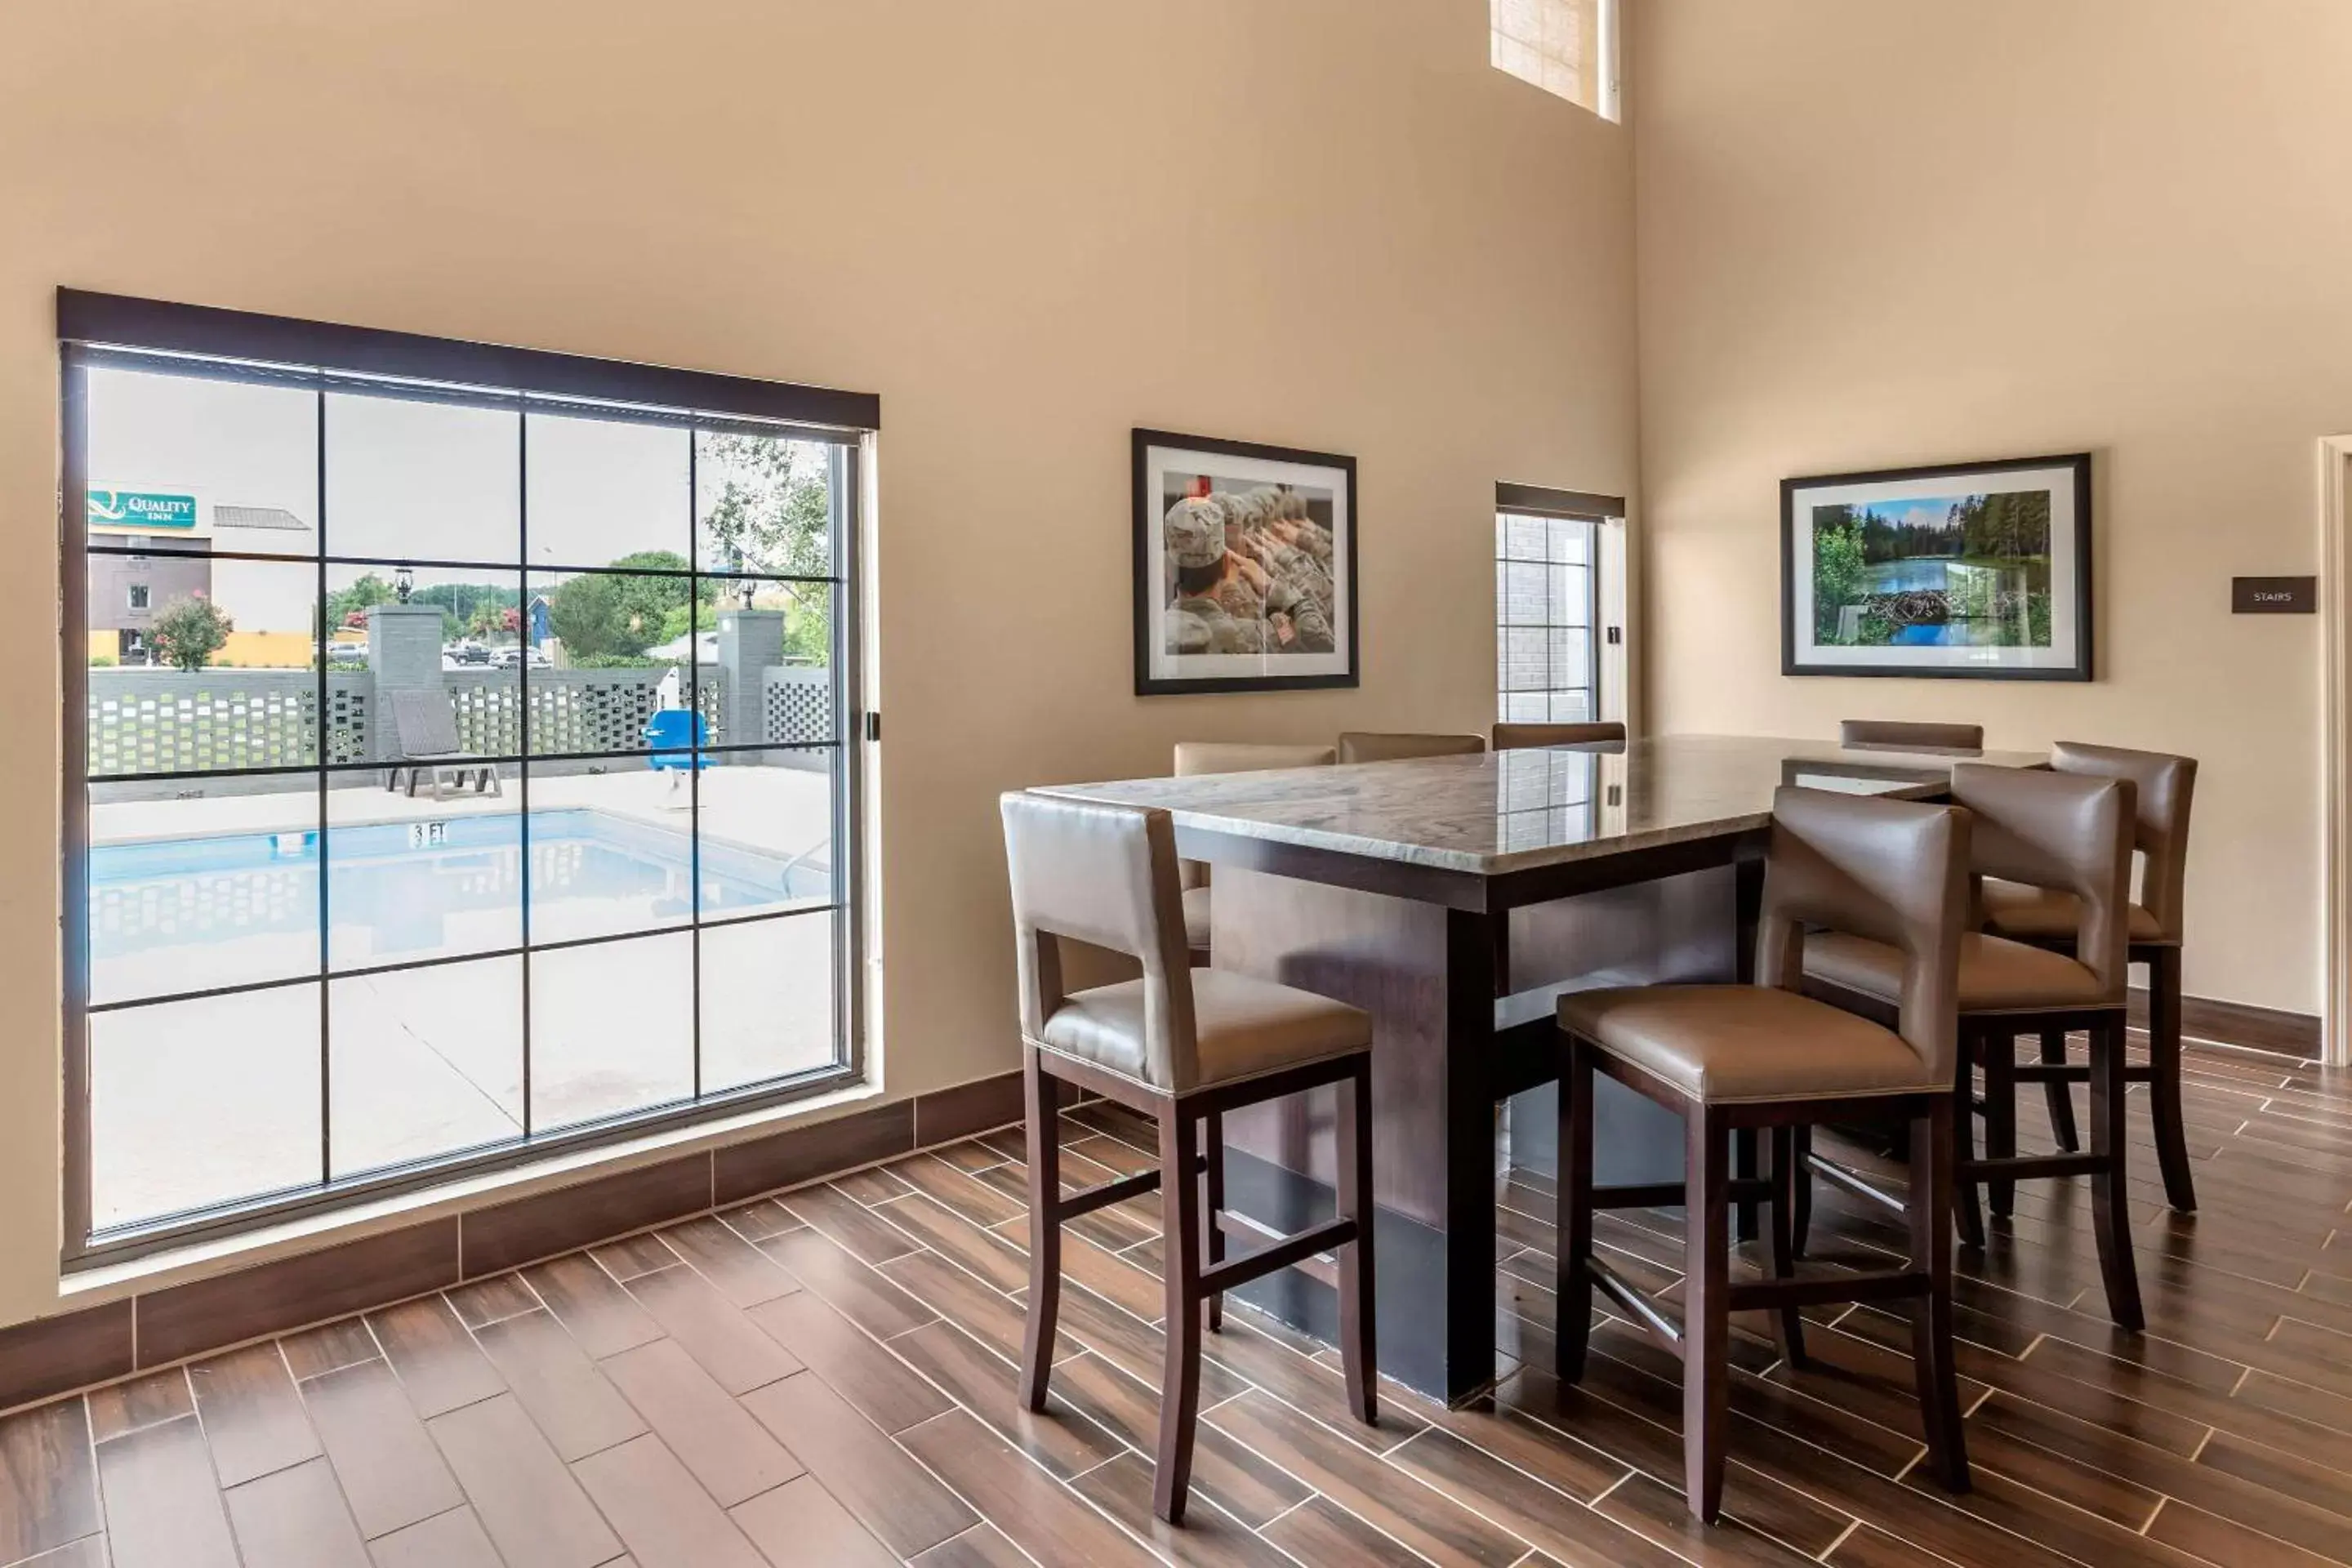 Restaurant/places to eat, Pool View in Comfort Suites near Camp Lejeune